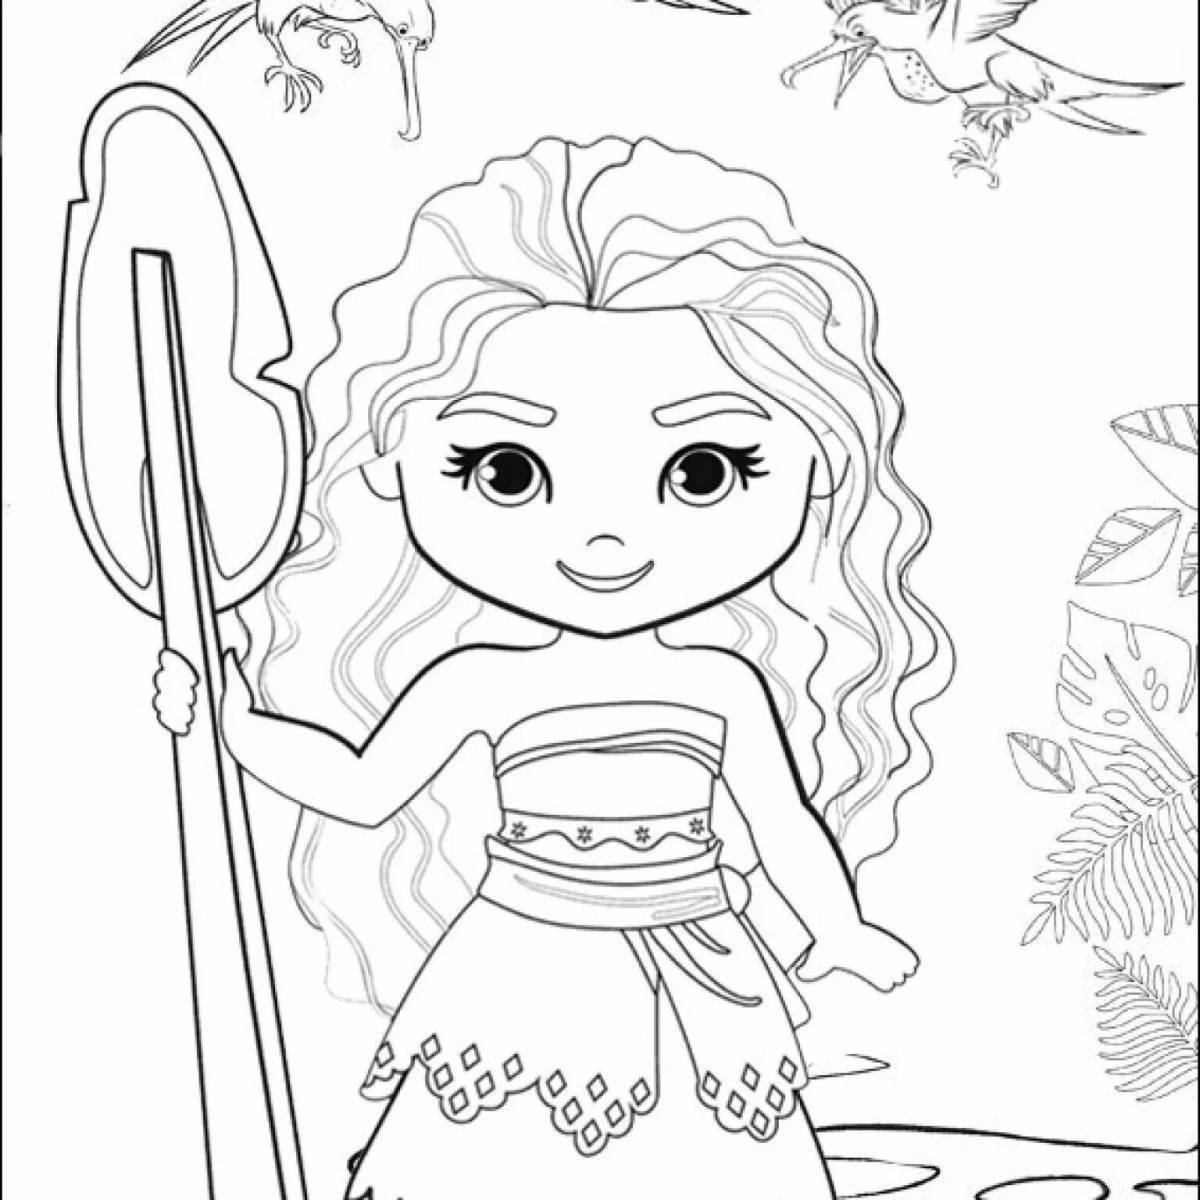 Moana girls coloring page